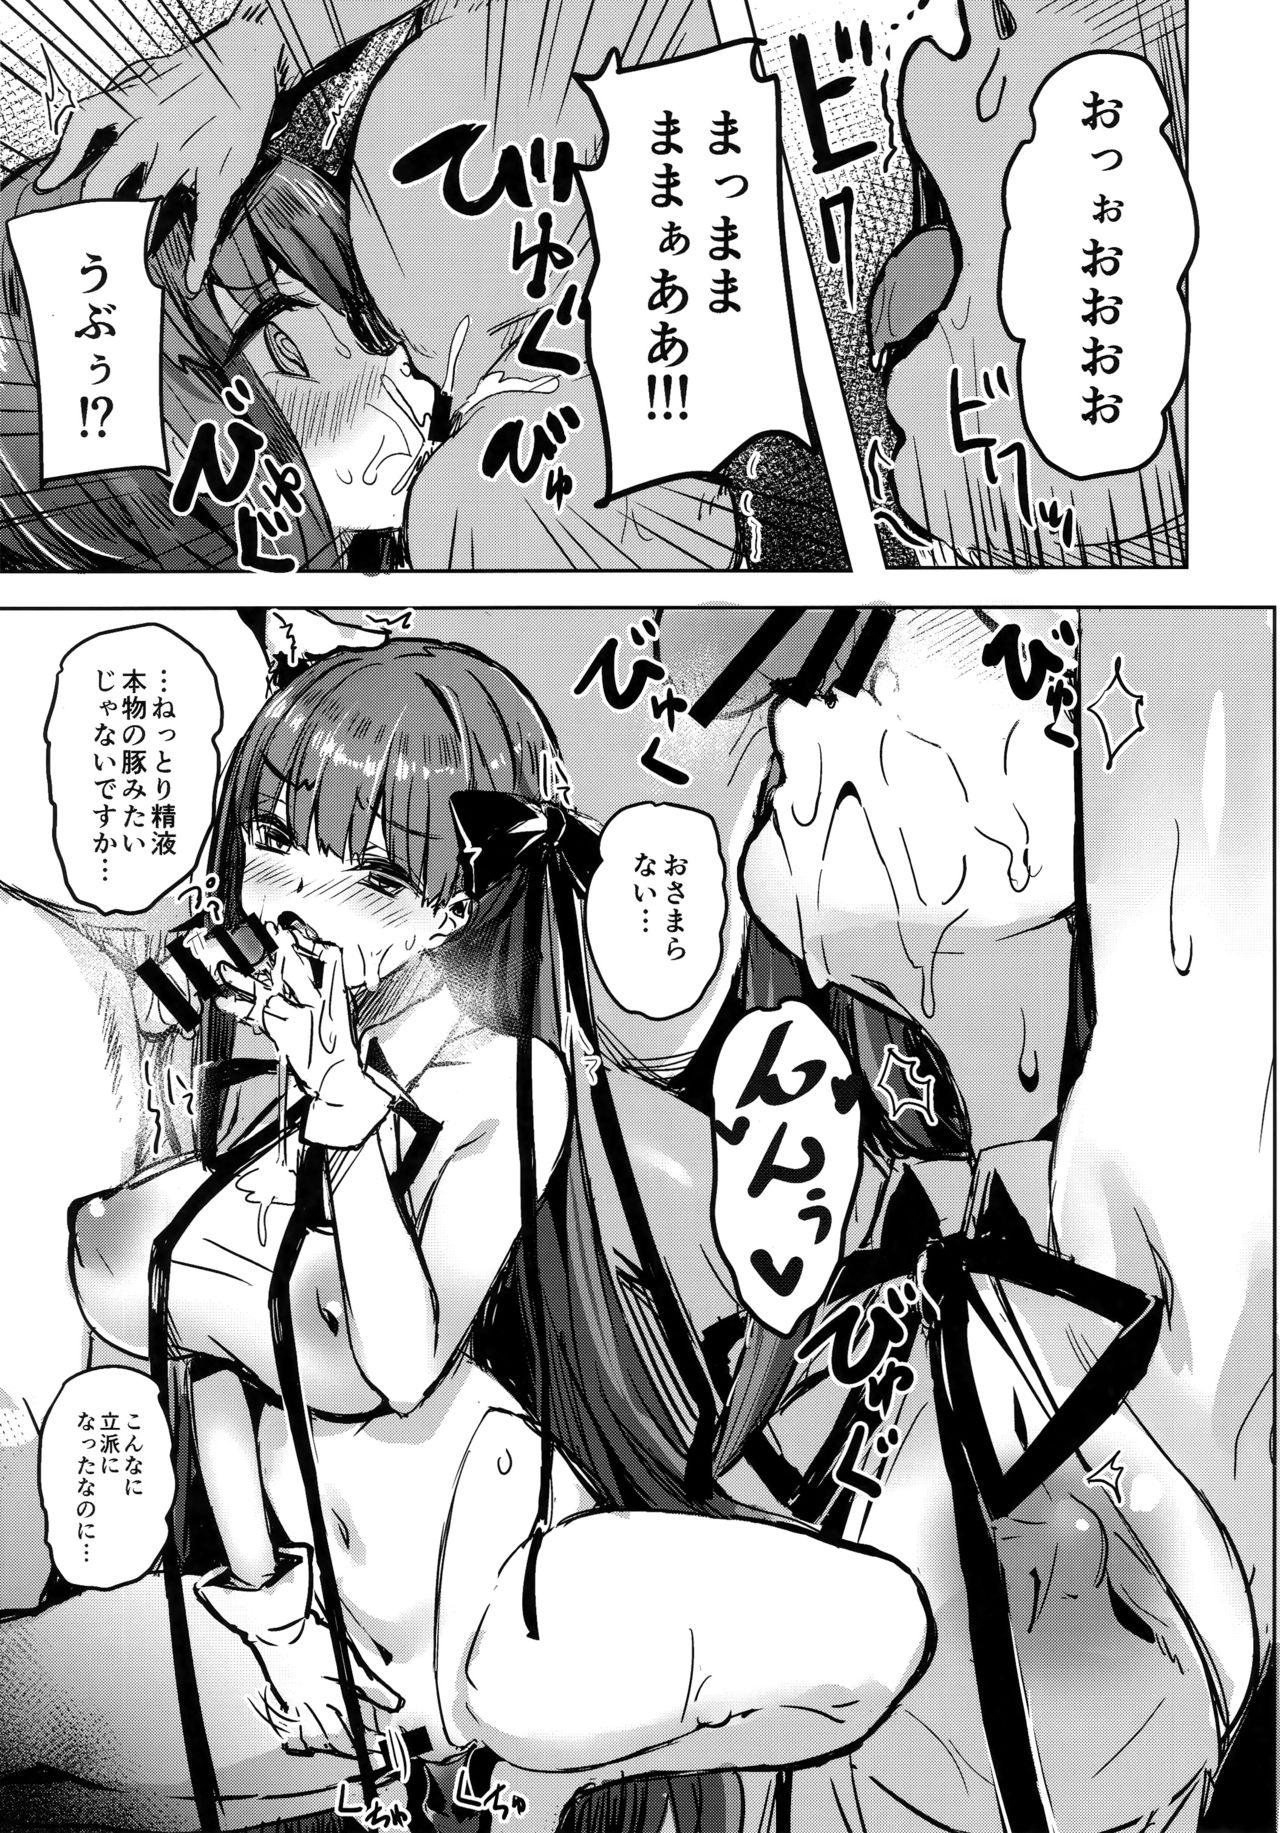 Creampies BB mama to ko buta-san - Fate grand order Sex Party - Page 10